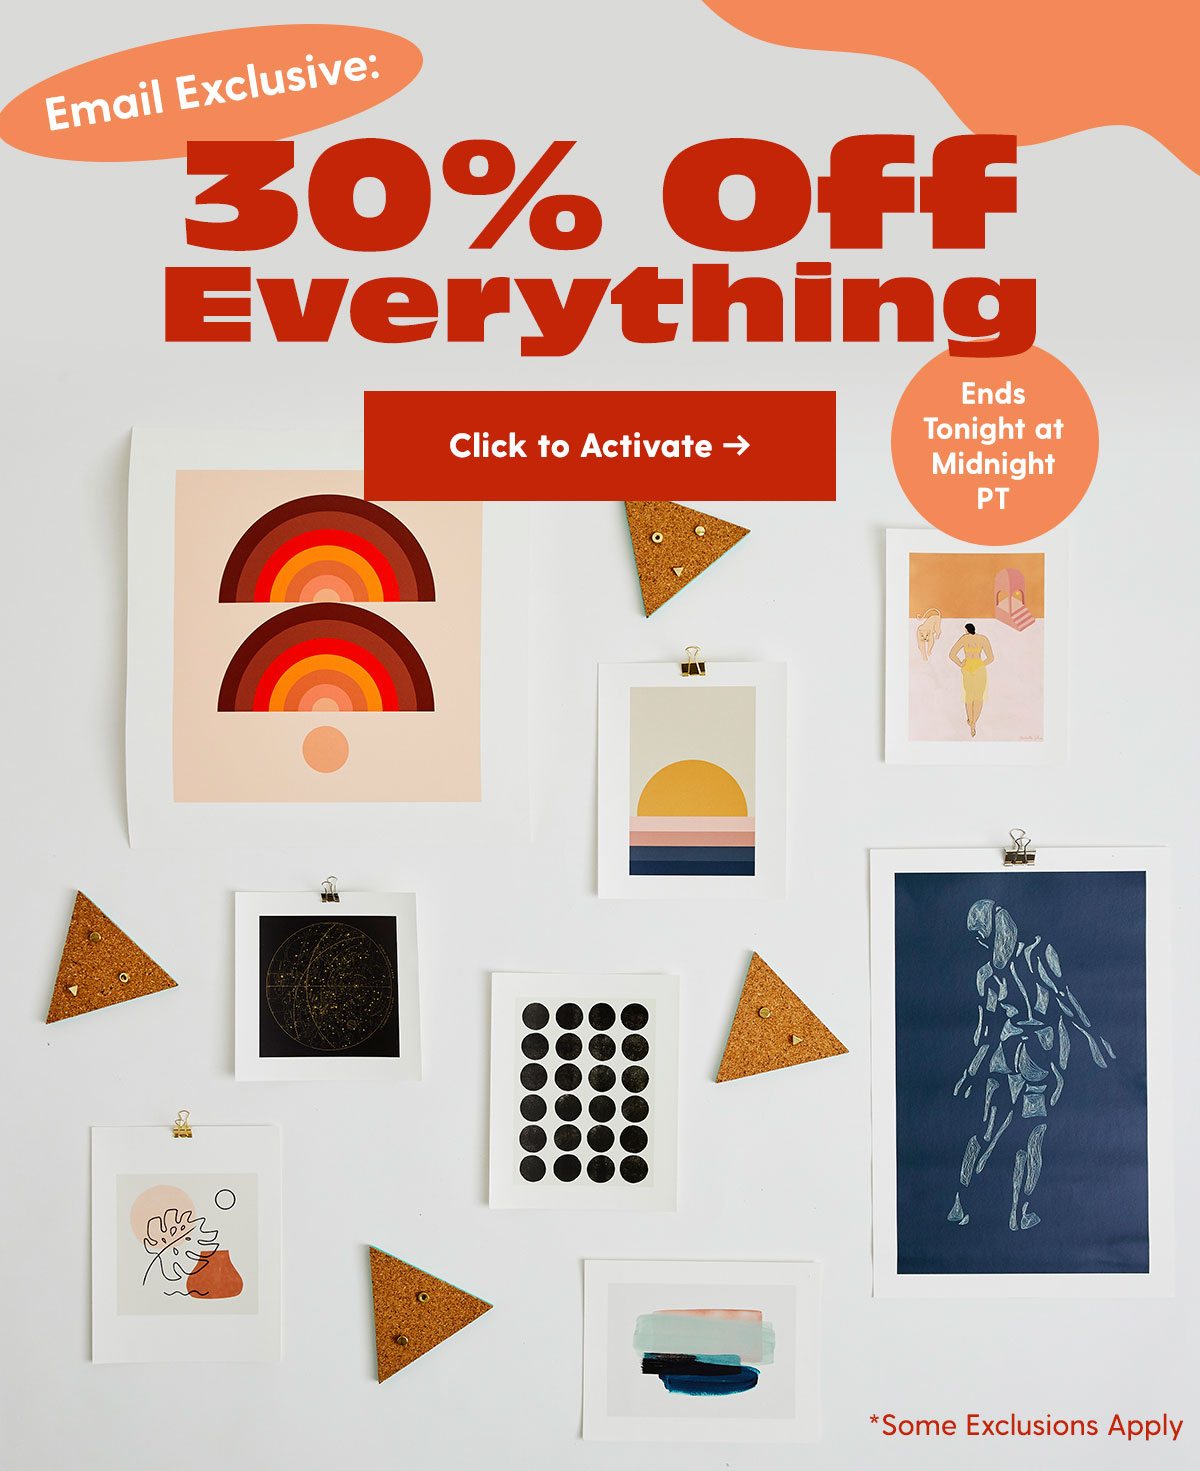 Email Exclusive: 30% Off Everything Ends Tonight at Midnight PT *Some Exclusions Apply Click to Activate > 